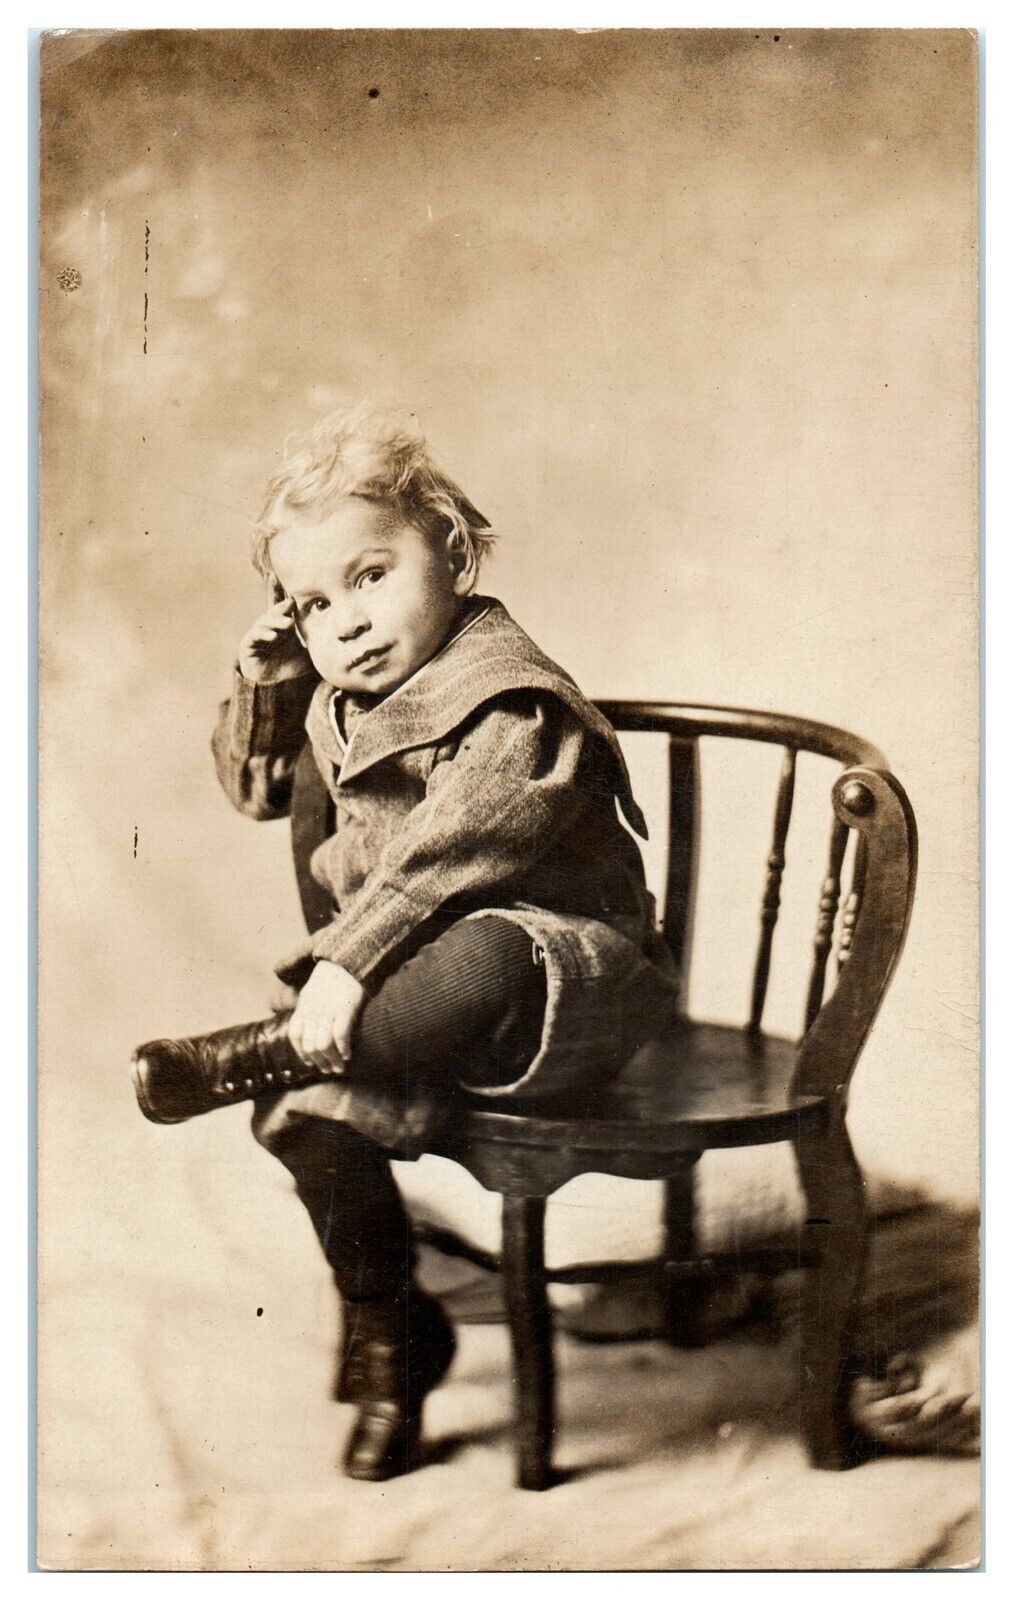 1910's Old Soul Adultish Sophisticated Child Posing RPPC Postcard VTG PHoto B1